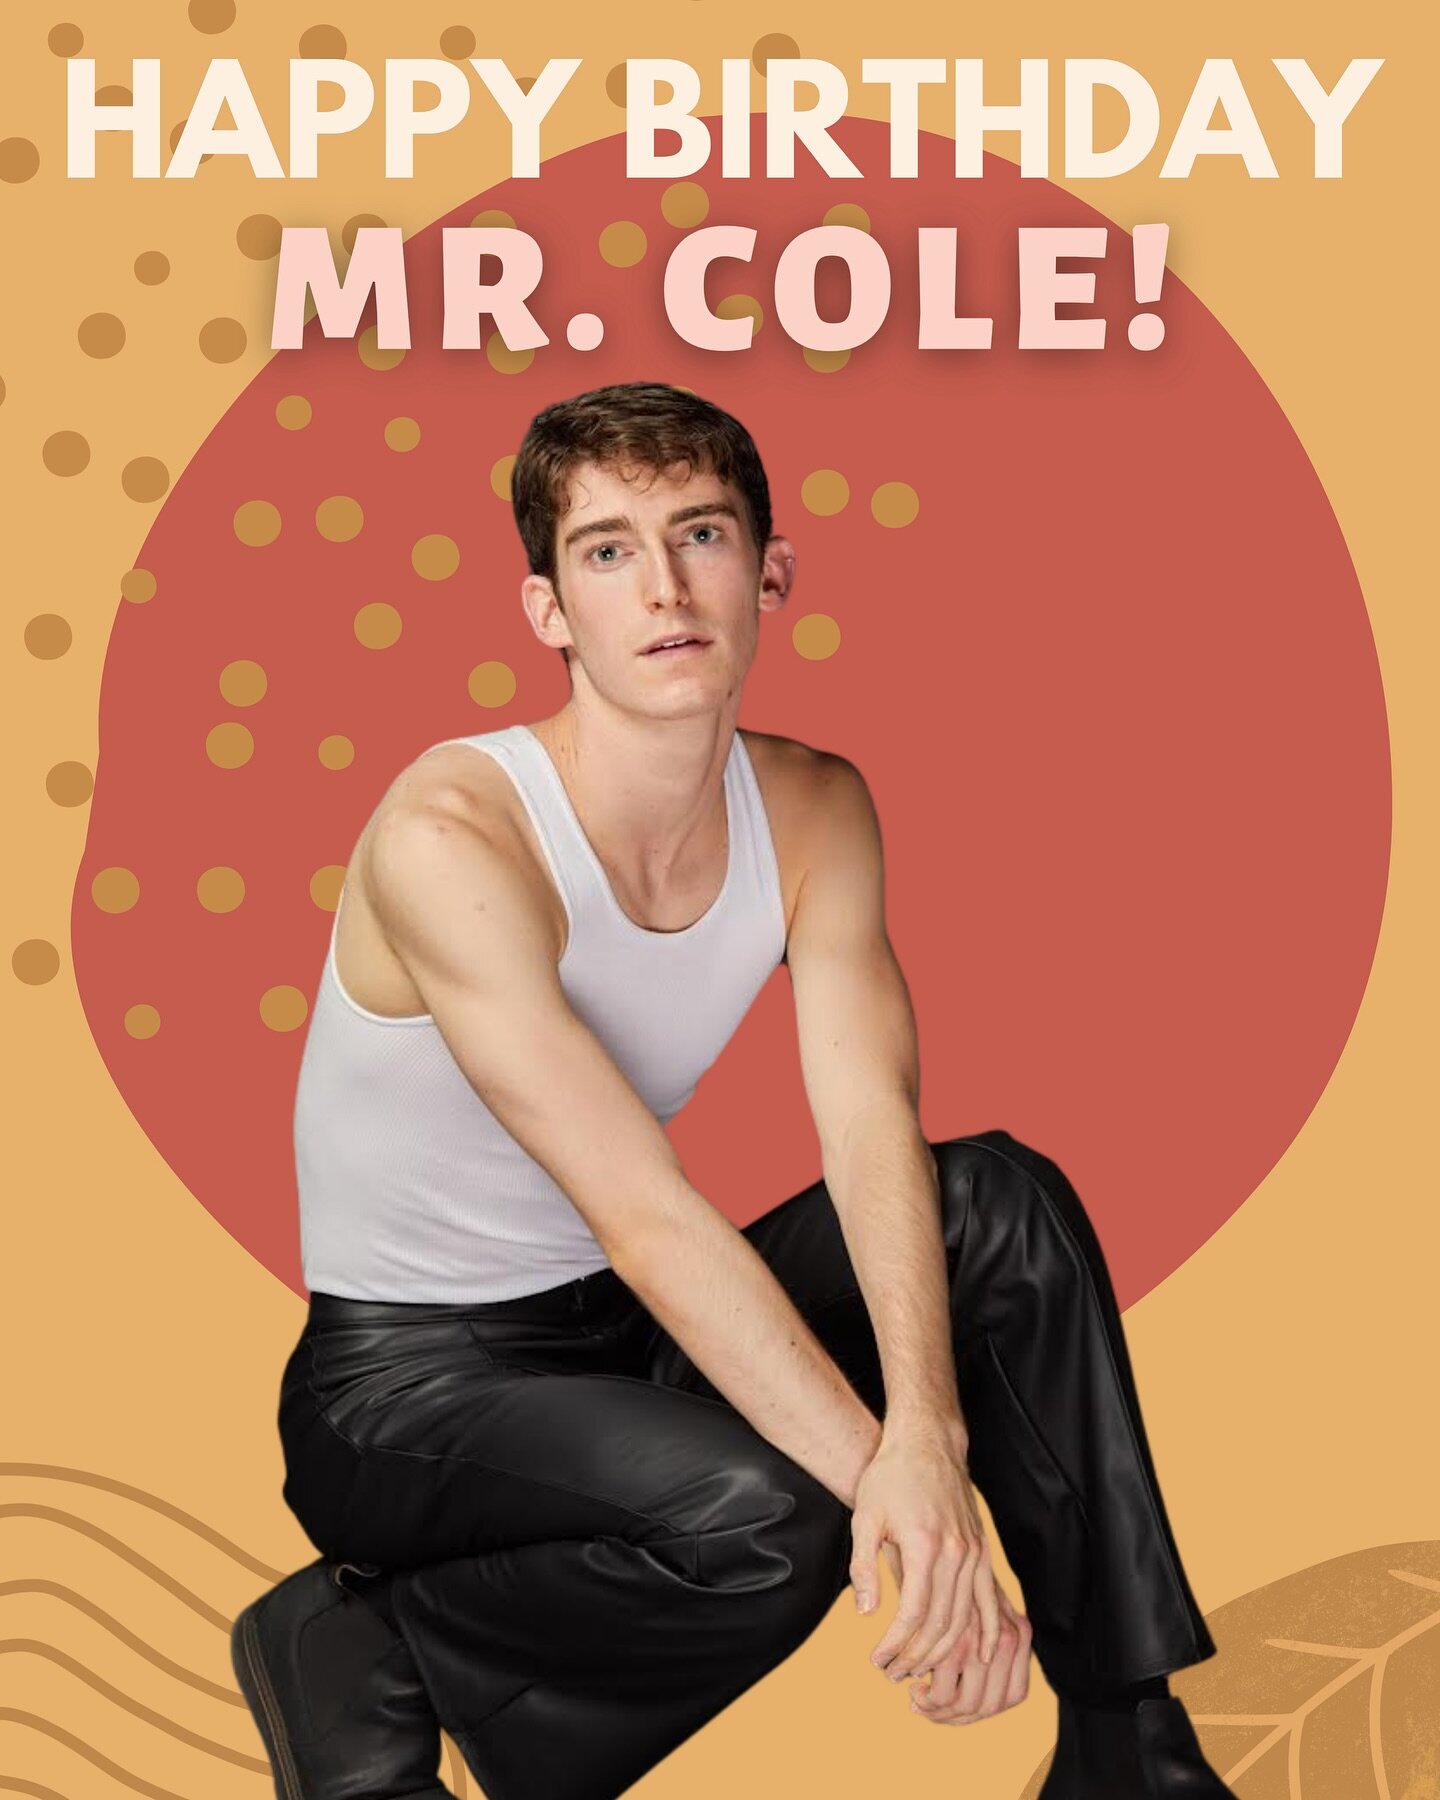 🎉 Join us in wishing 1st year Faculty &amp; RAD Alum  @_coleneville a very Happy Birthday!

💖 Happy Birthday, Mr. Cole! It&rsquo;s been an honor watching you grow as a dancer and having you back to teach and inspire our RAD Dancers - a true full ci